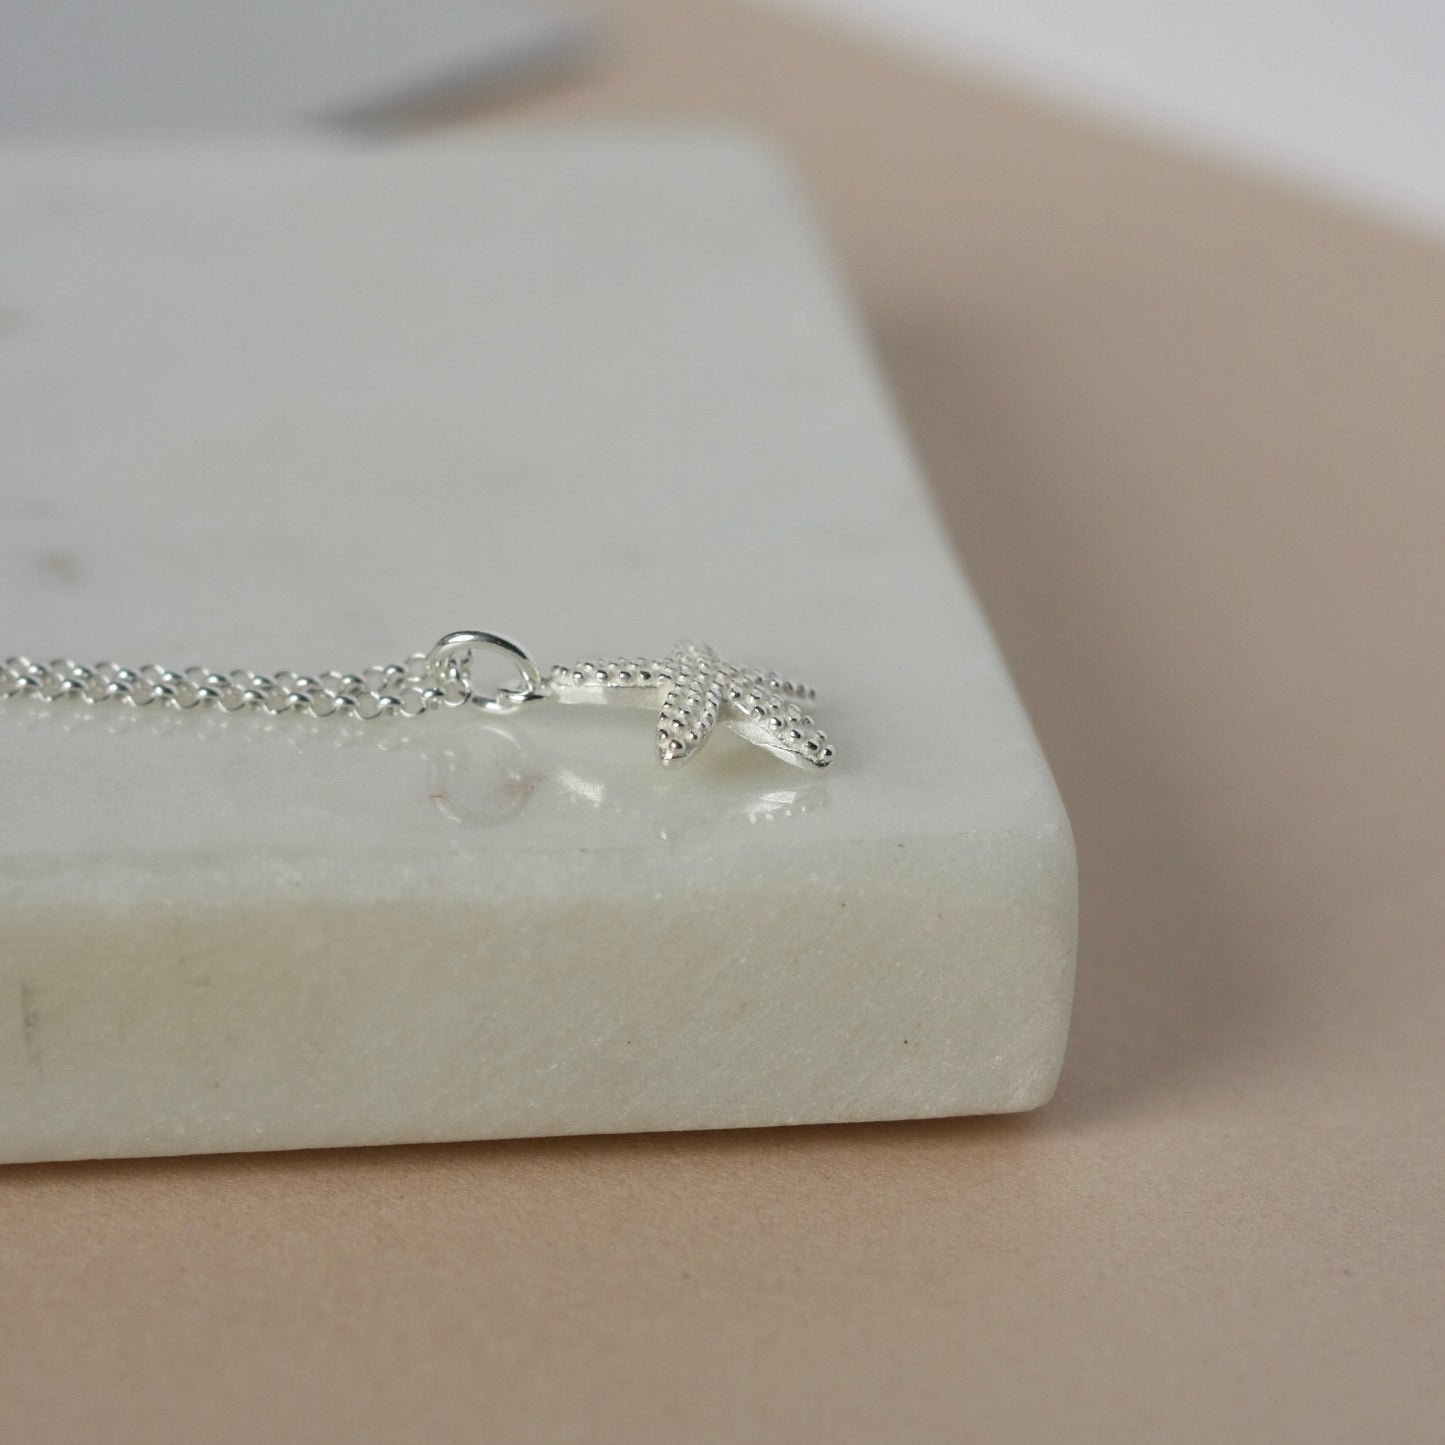 Sterling Silver Starfish Charm Necklace